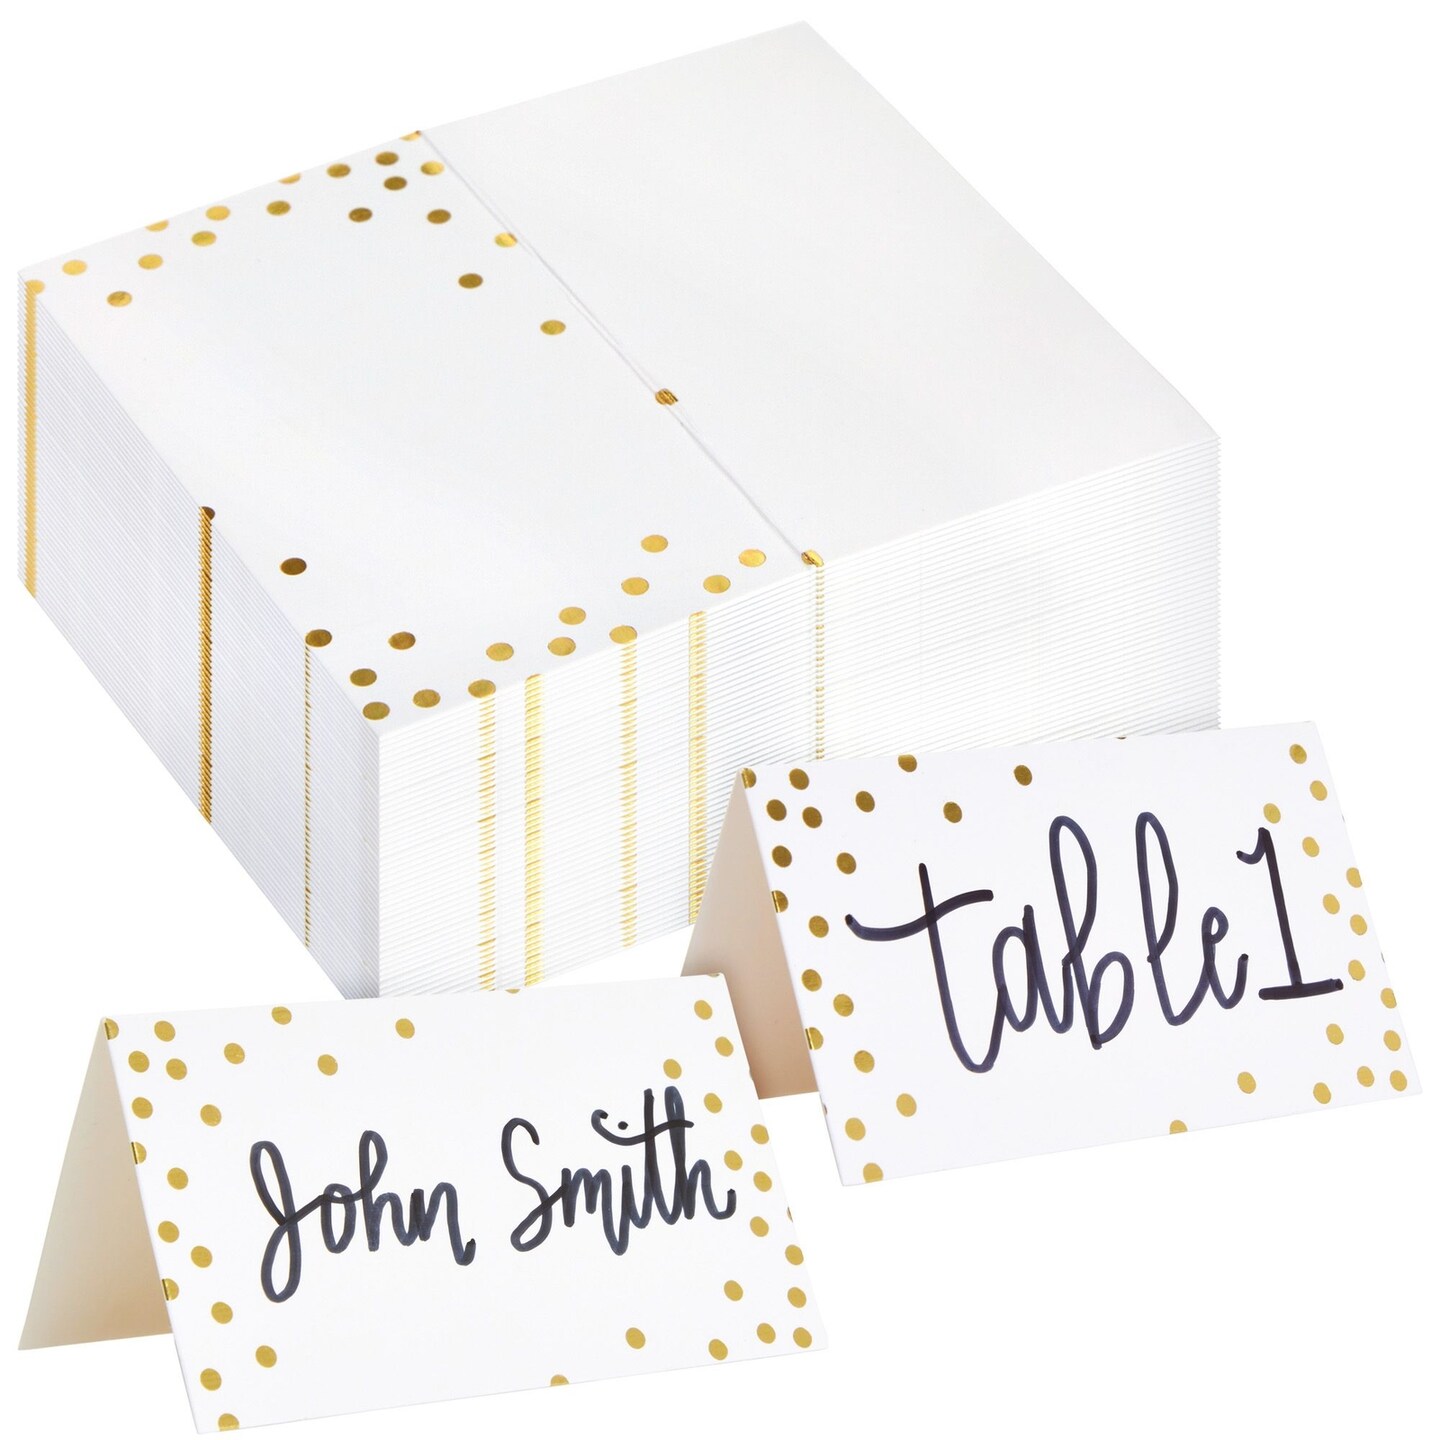 100 Pack Place Cards for Table Setting - Blank Table Name Cards for Wedding, Banquet, Events, Reserved Seating (Gold Foil Polka Dot, 2 x 3.5 In)